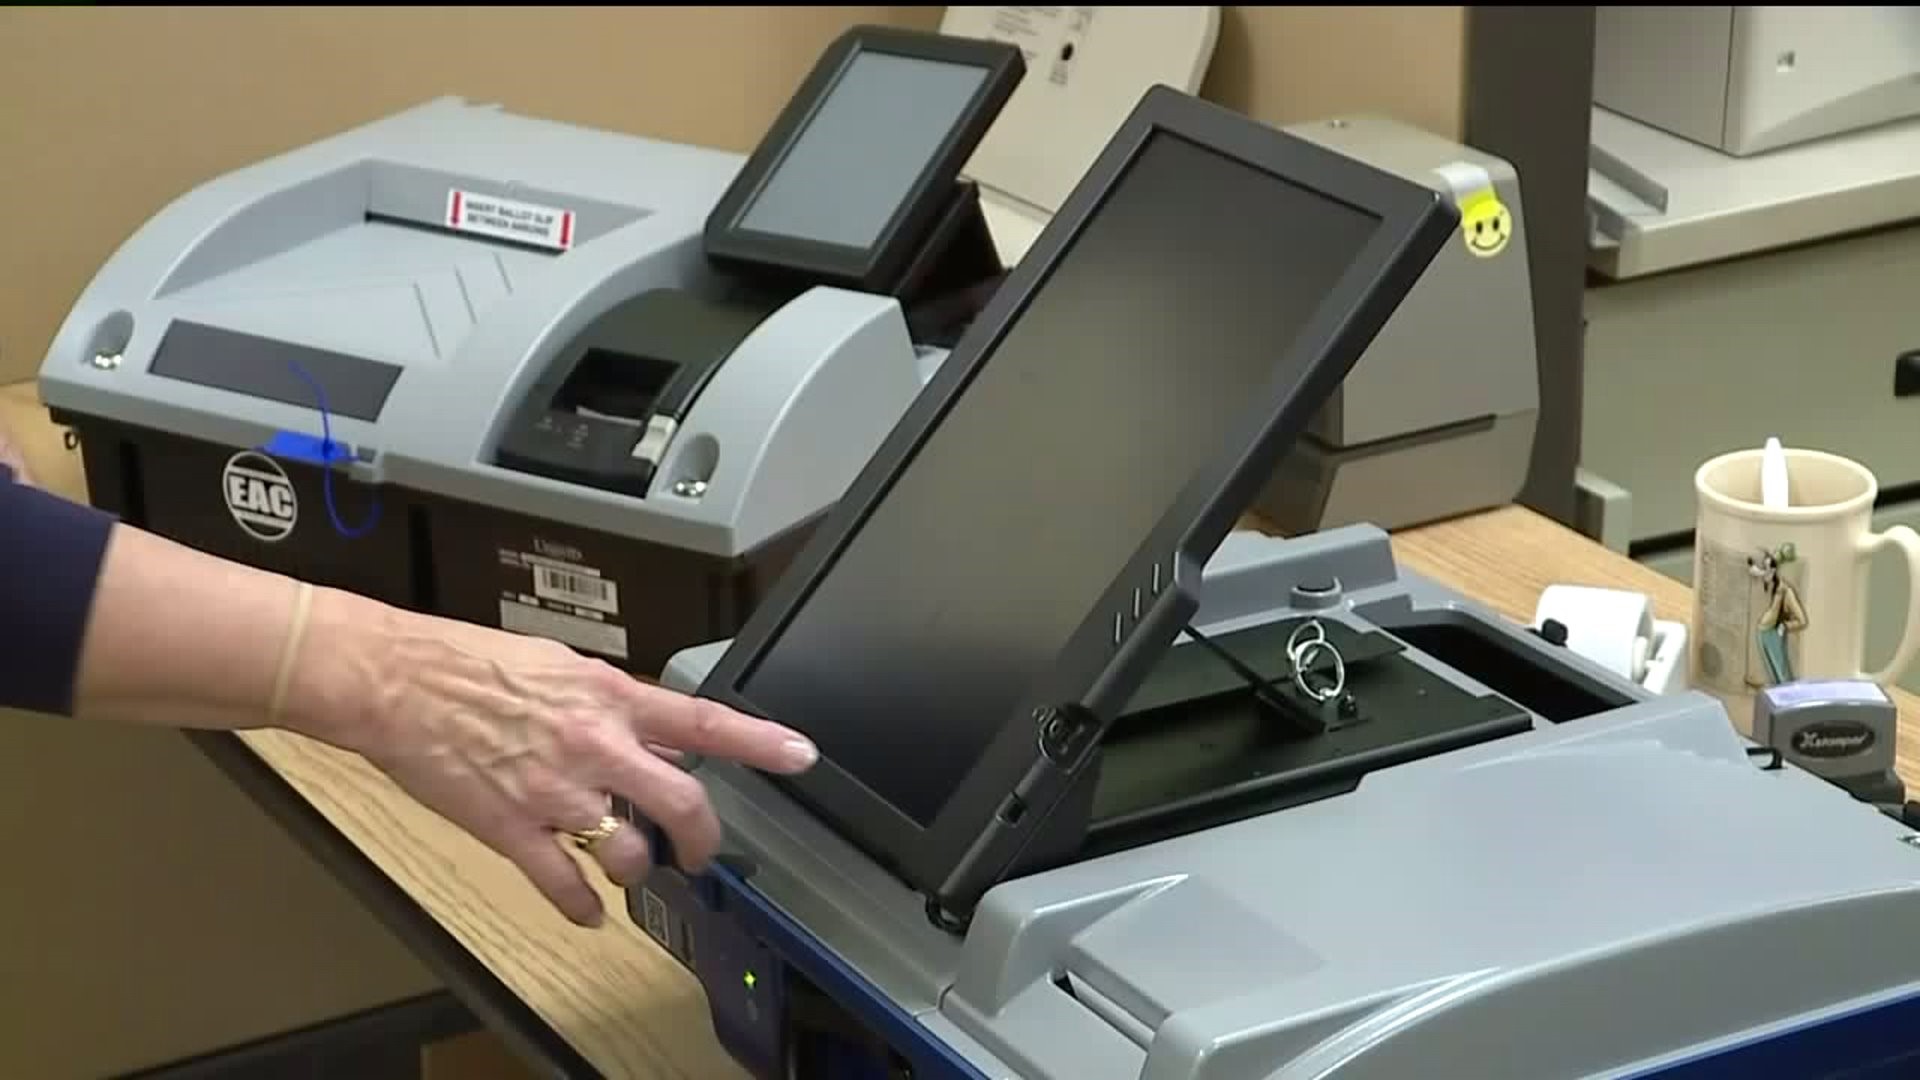 New Voting System in Union County Ready for Election Day